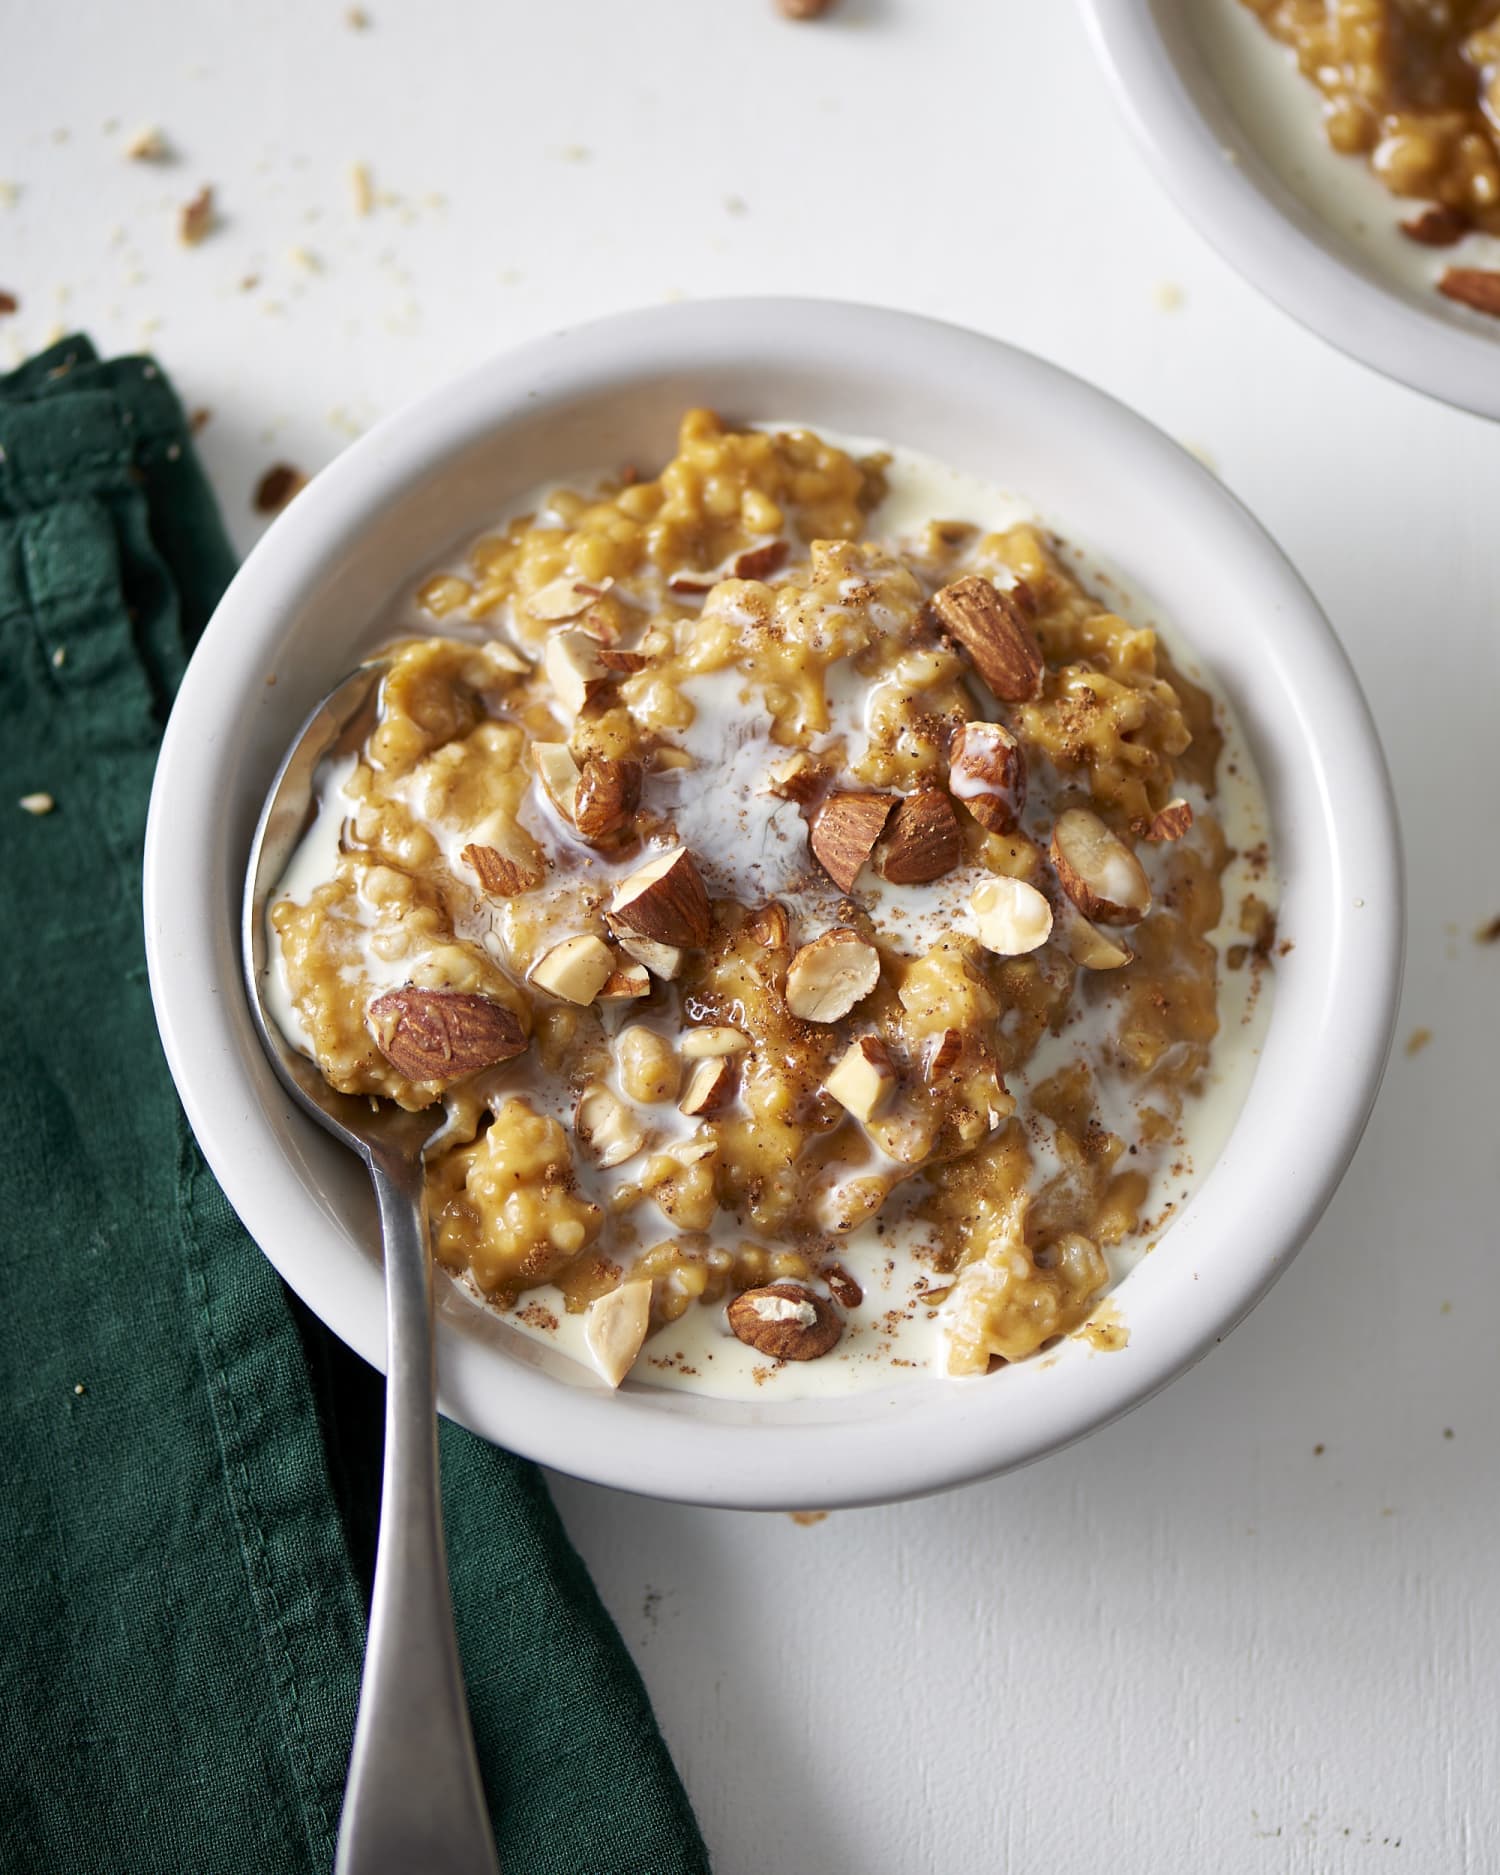 The Quick Oatmeal Upgrade I Use Every Single Morning | Kitchn